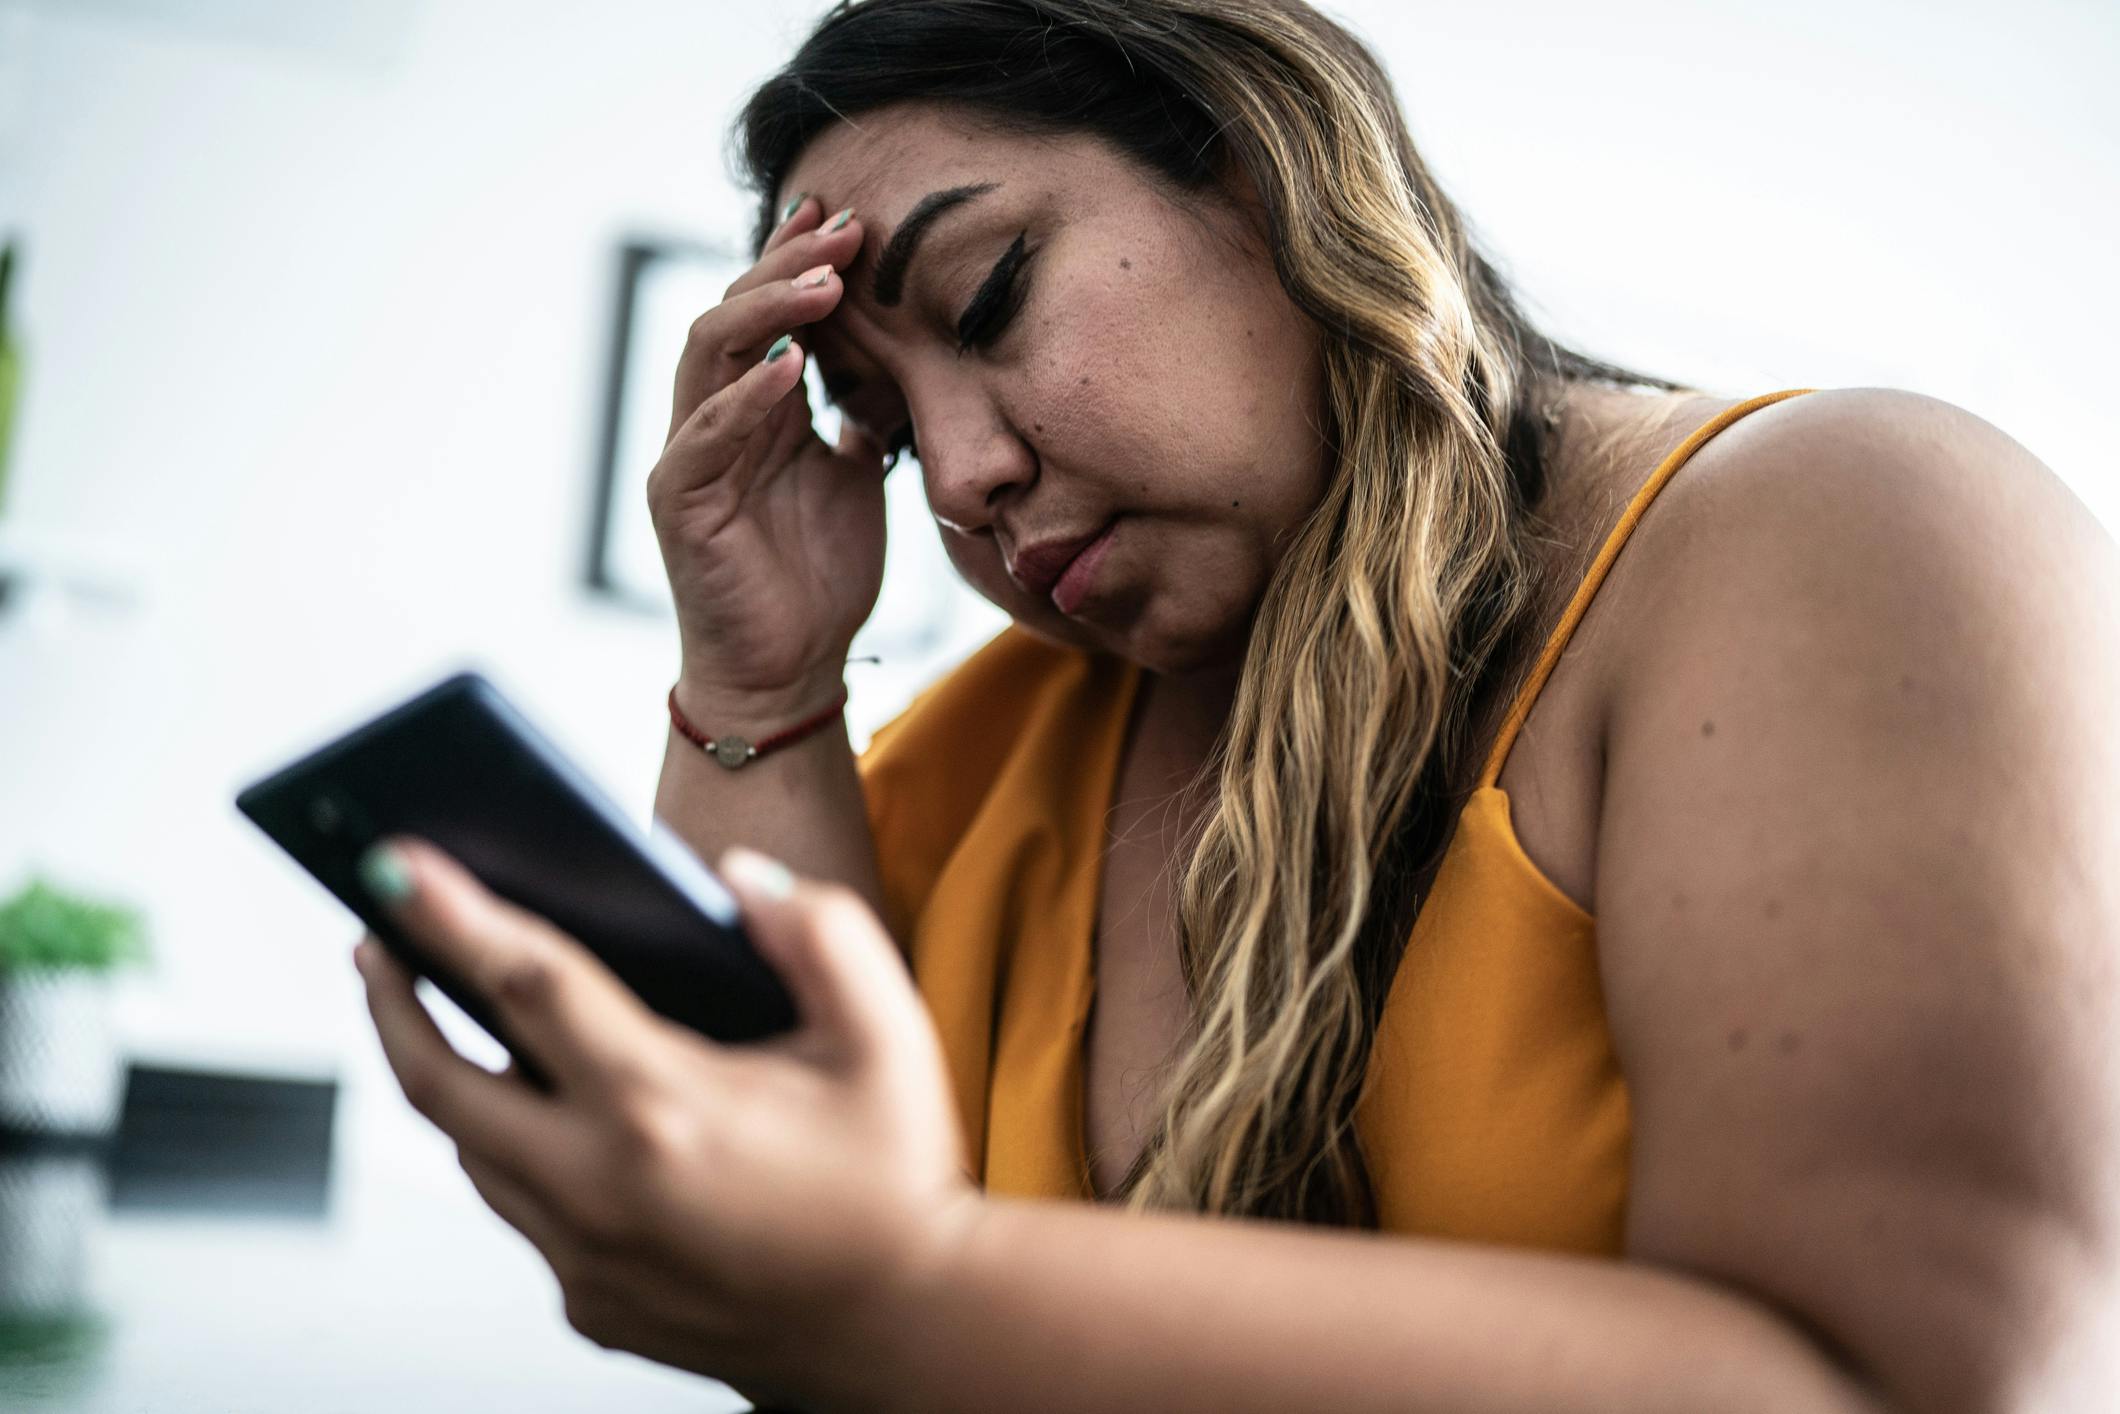 A woman looking at her phone looking distressed